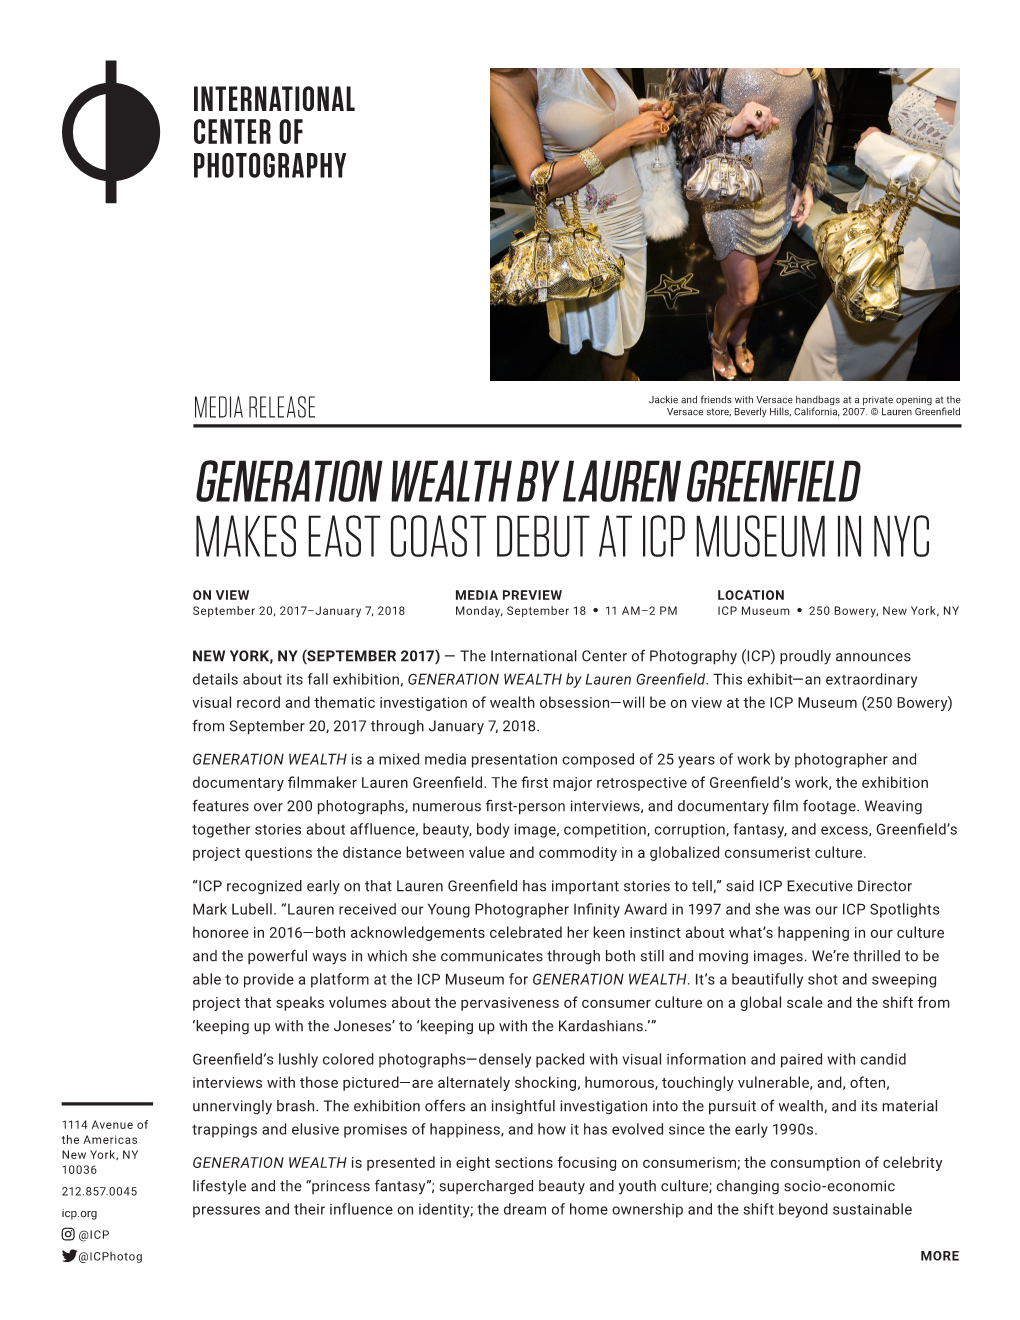 Generation Wealth by Lauren Greenfield Makes East Coast Debut at Icp Museum in Nyc